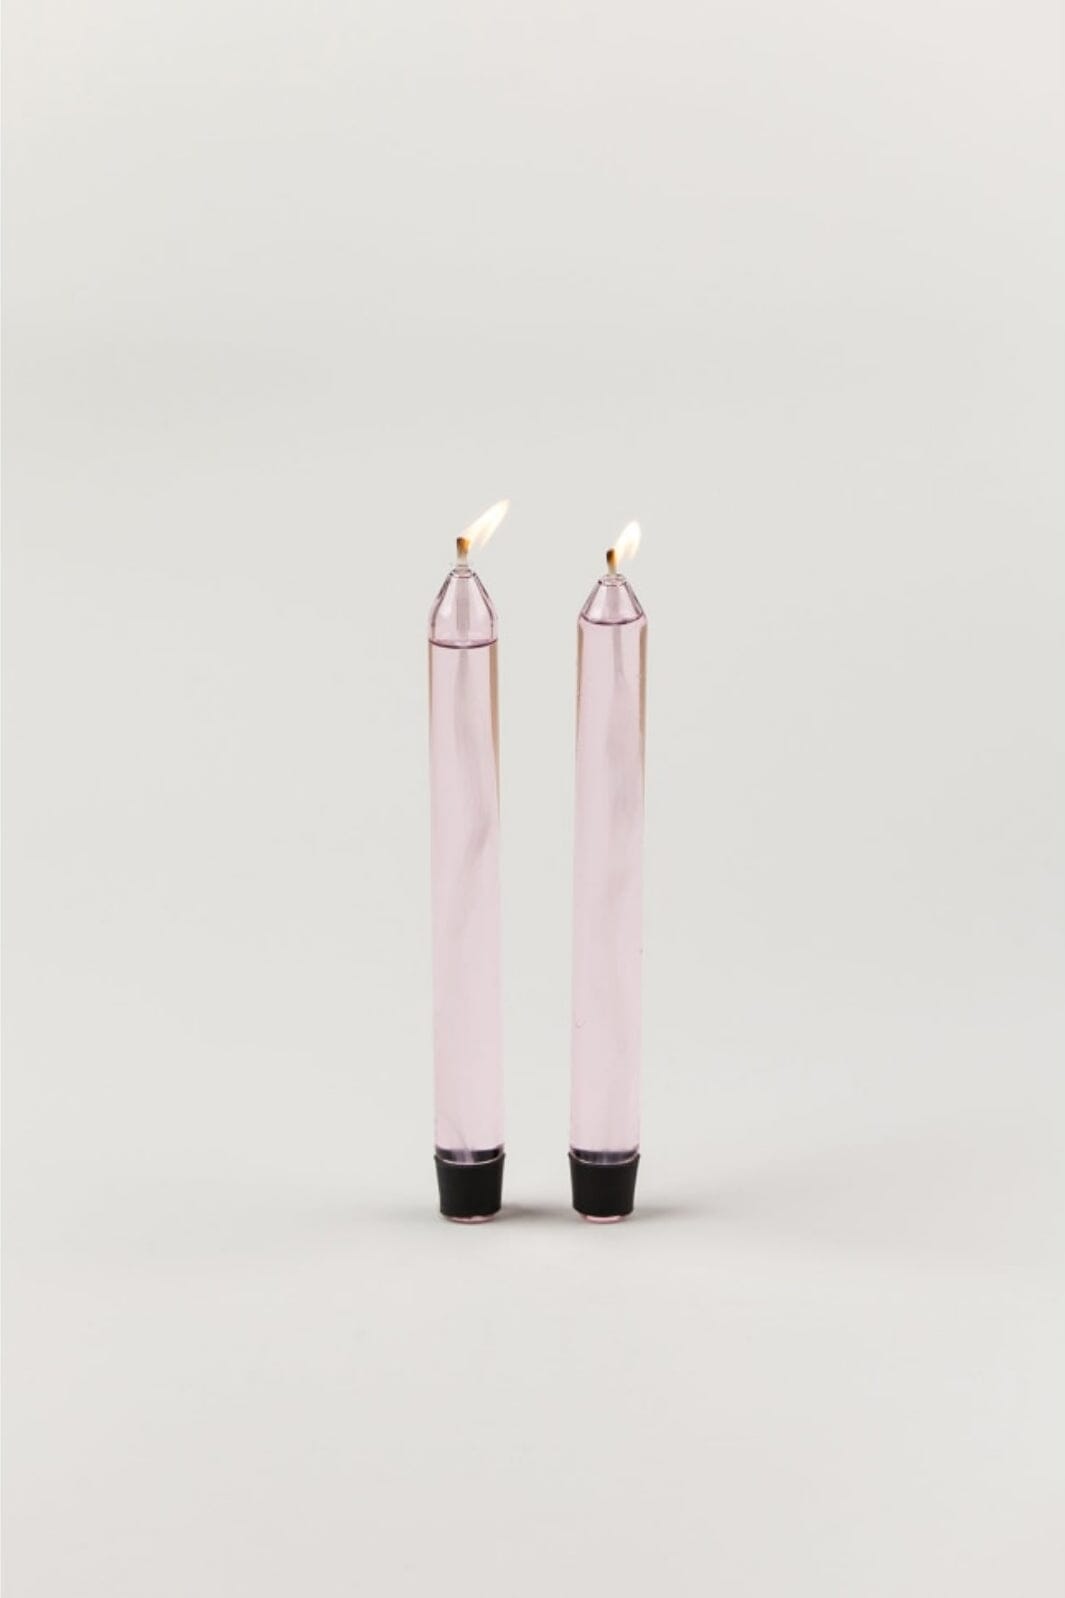 Studio About - Glass Candles, Oil Candles, Rose, 21022R Lys 